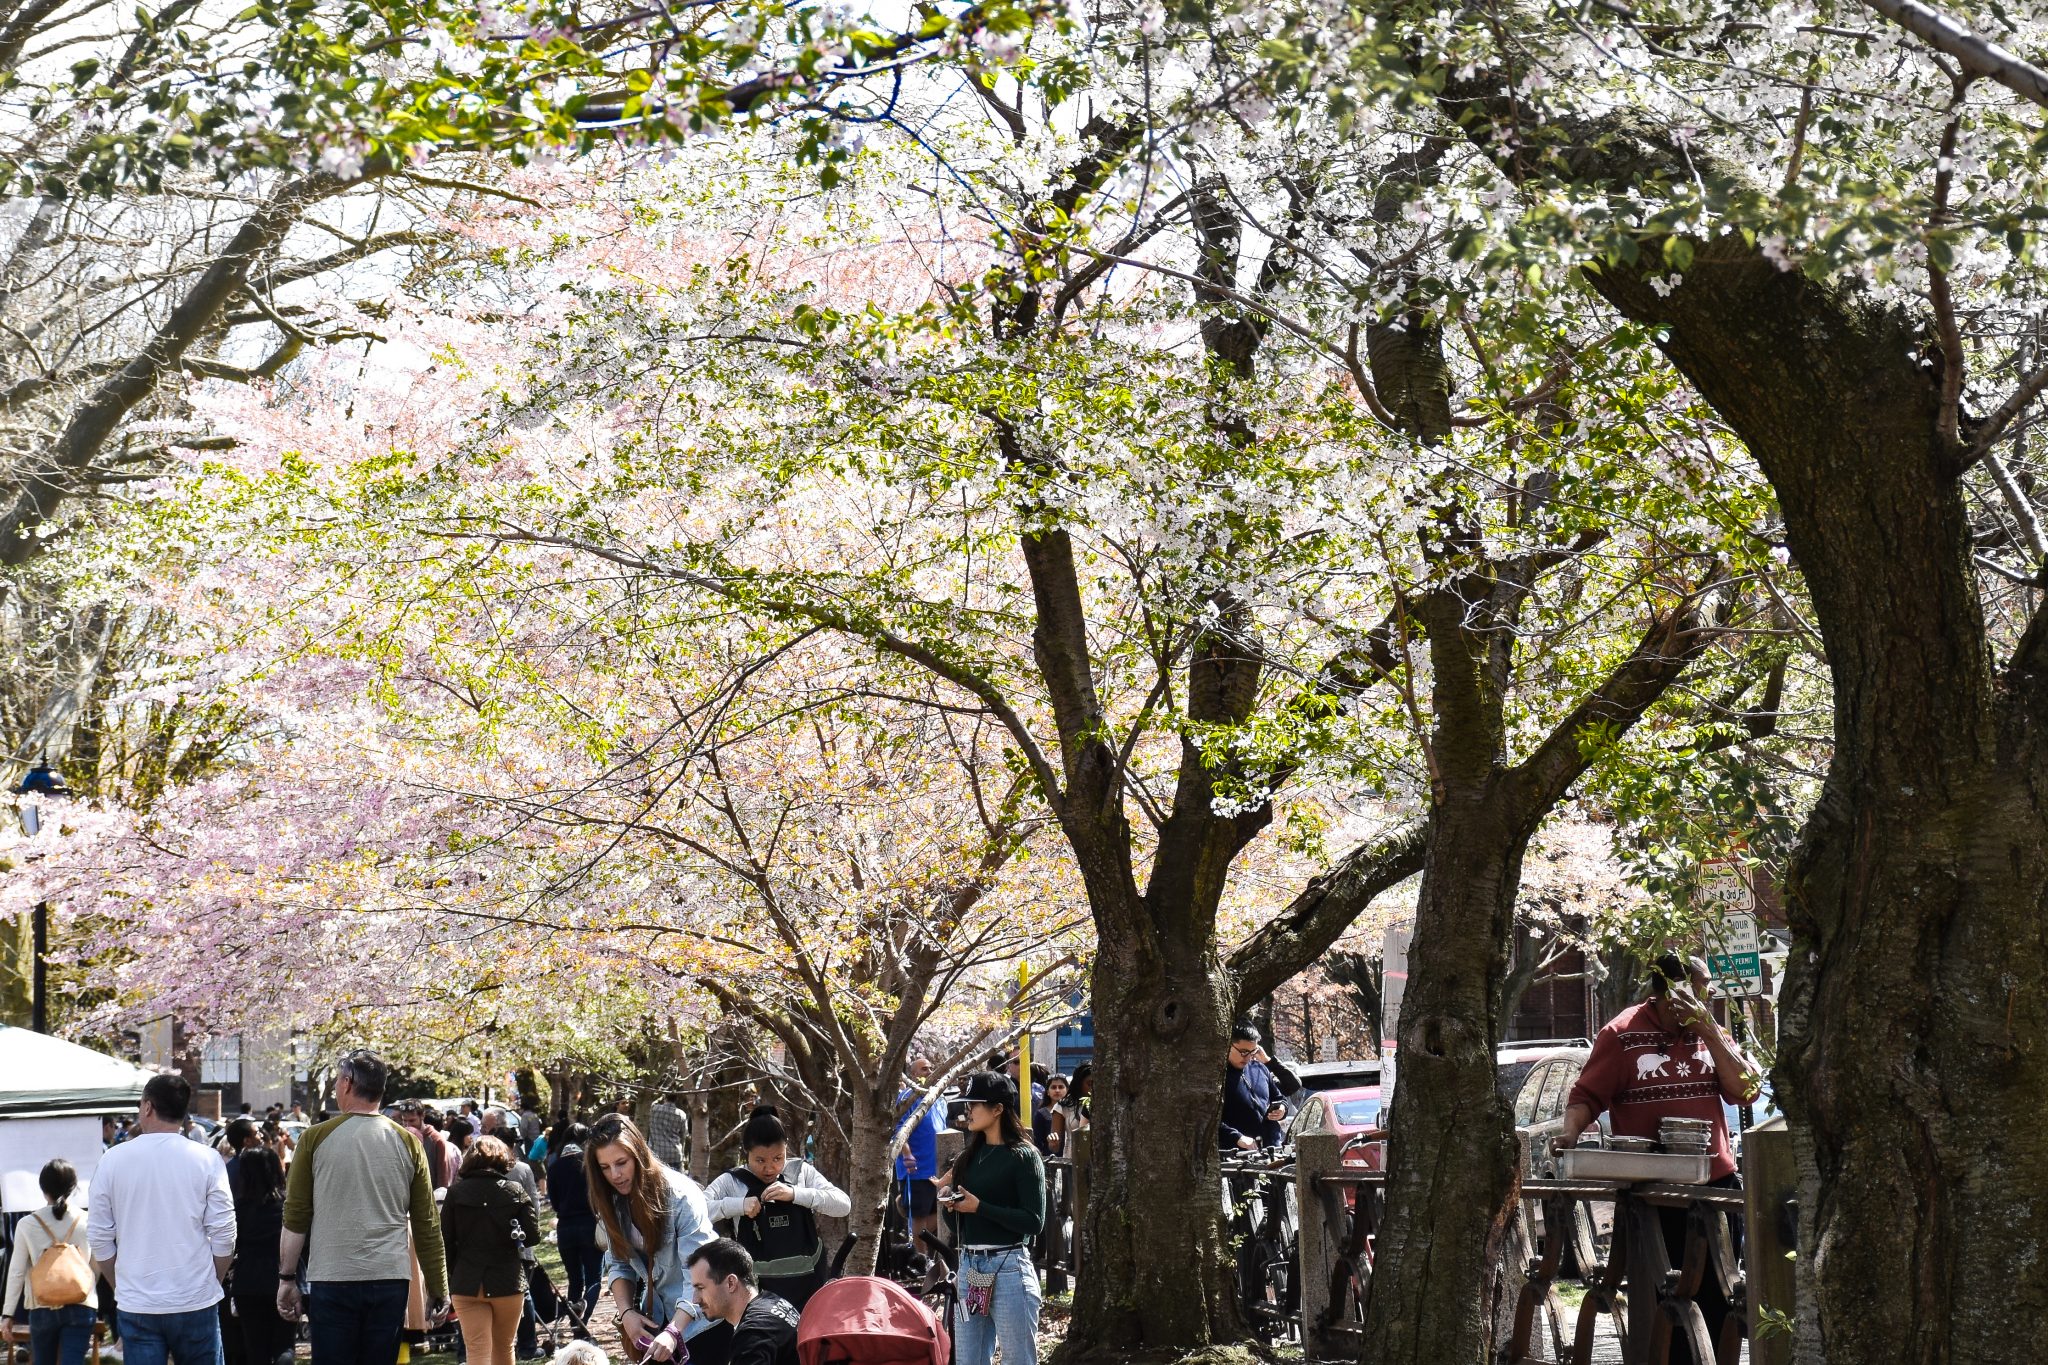 Celebrate Spring at the Cherry Blossom Festival in New Haven, CT The